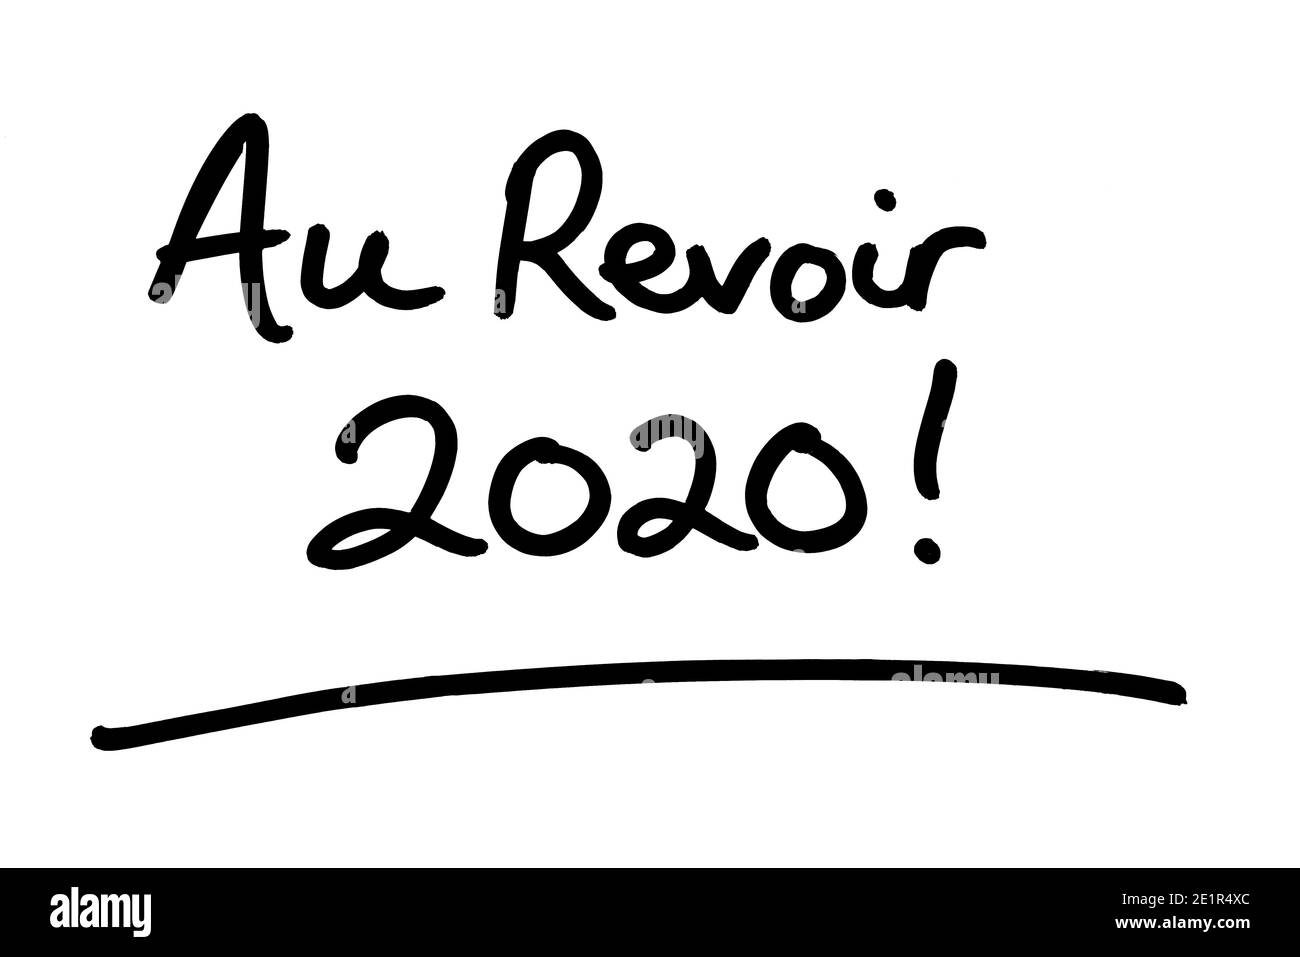 Au Revoir 2020! - meaning Goodbye 2020 in the French language - handwritten on a white background. Stock Photo